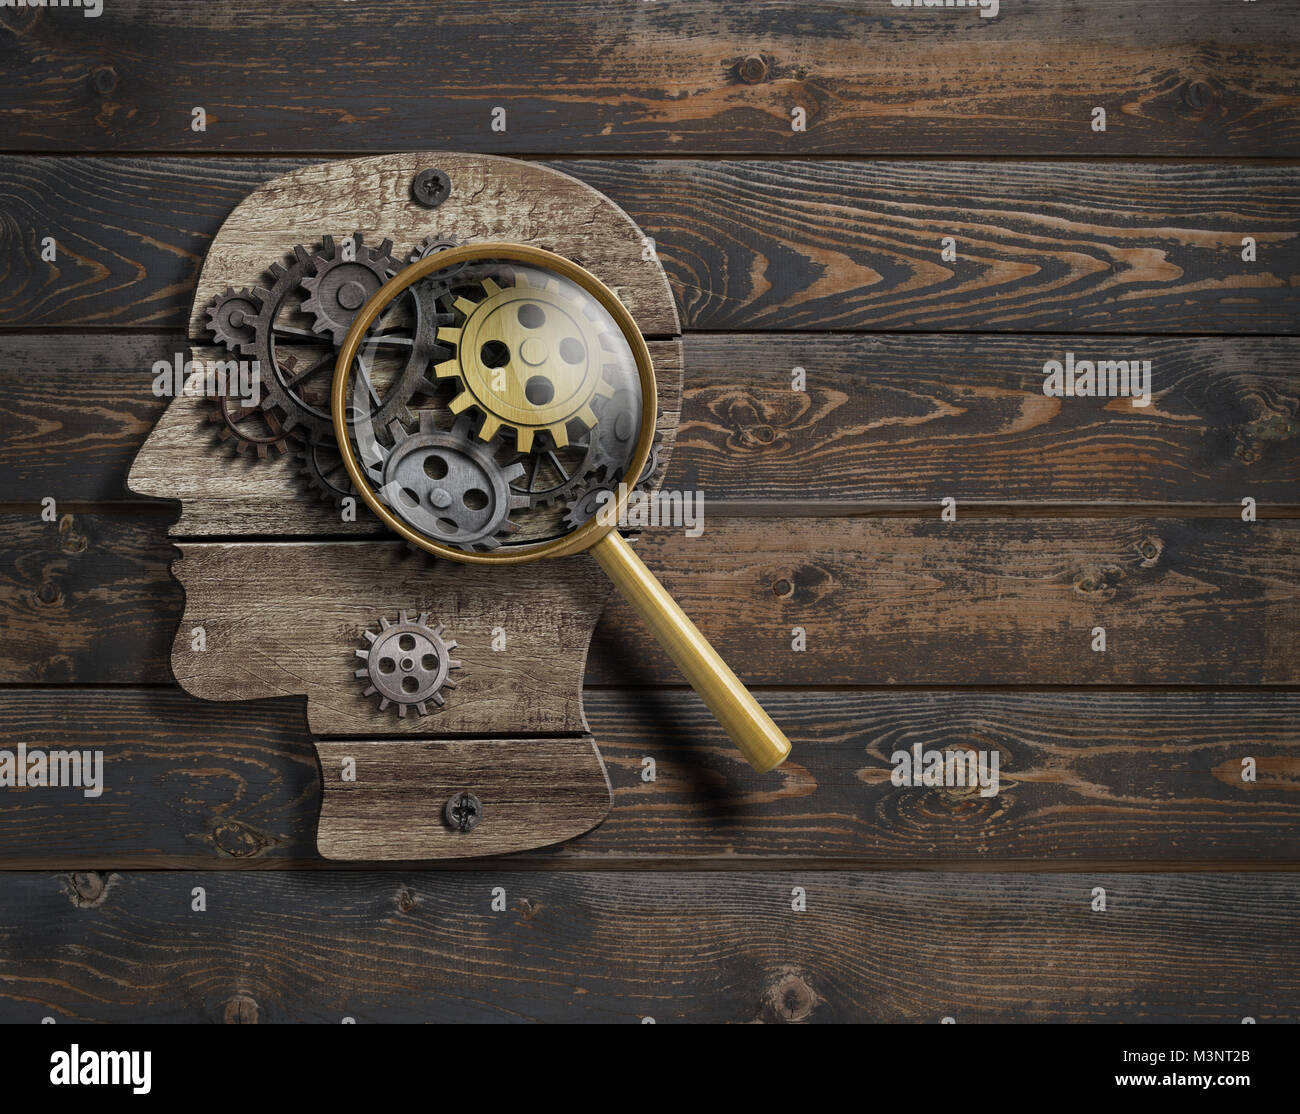 Psychology or invent conception. Brain function model 3d illustration. Stock Photo